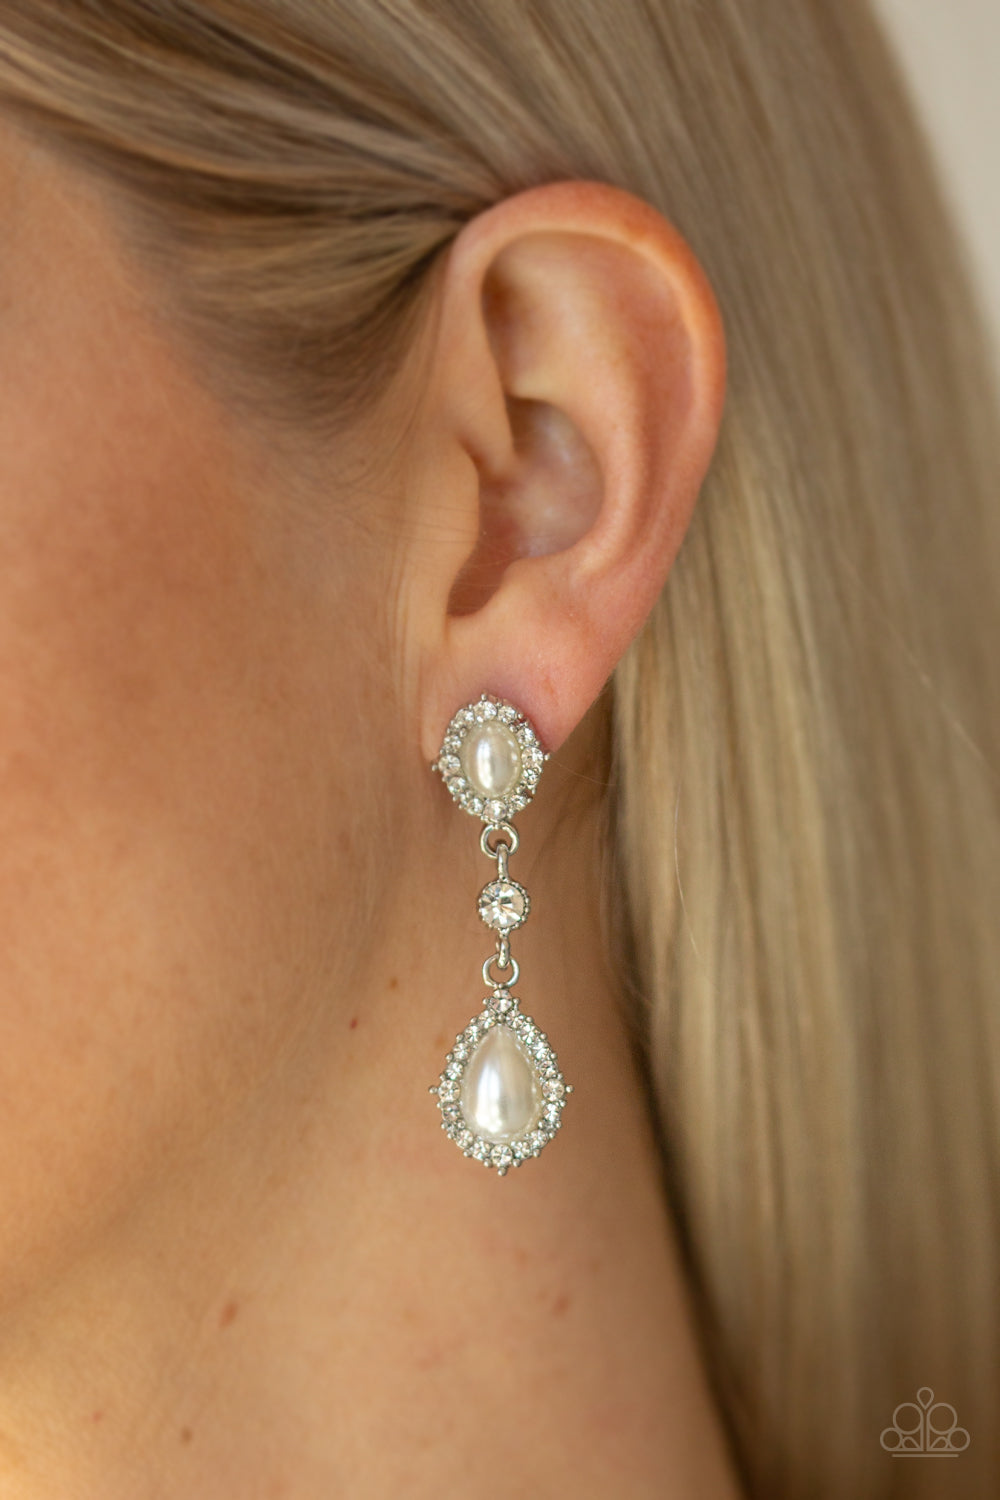 Paparazzi Accessories All-GLOWING - White Earrings solitaire white rhinestone is linked between two pearly white rhinestone encrusted frames, creating an elegant lure. Earring attaches to a standard post fitting.  Sold as one pair of post earrings.